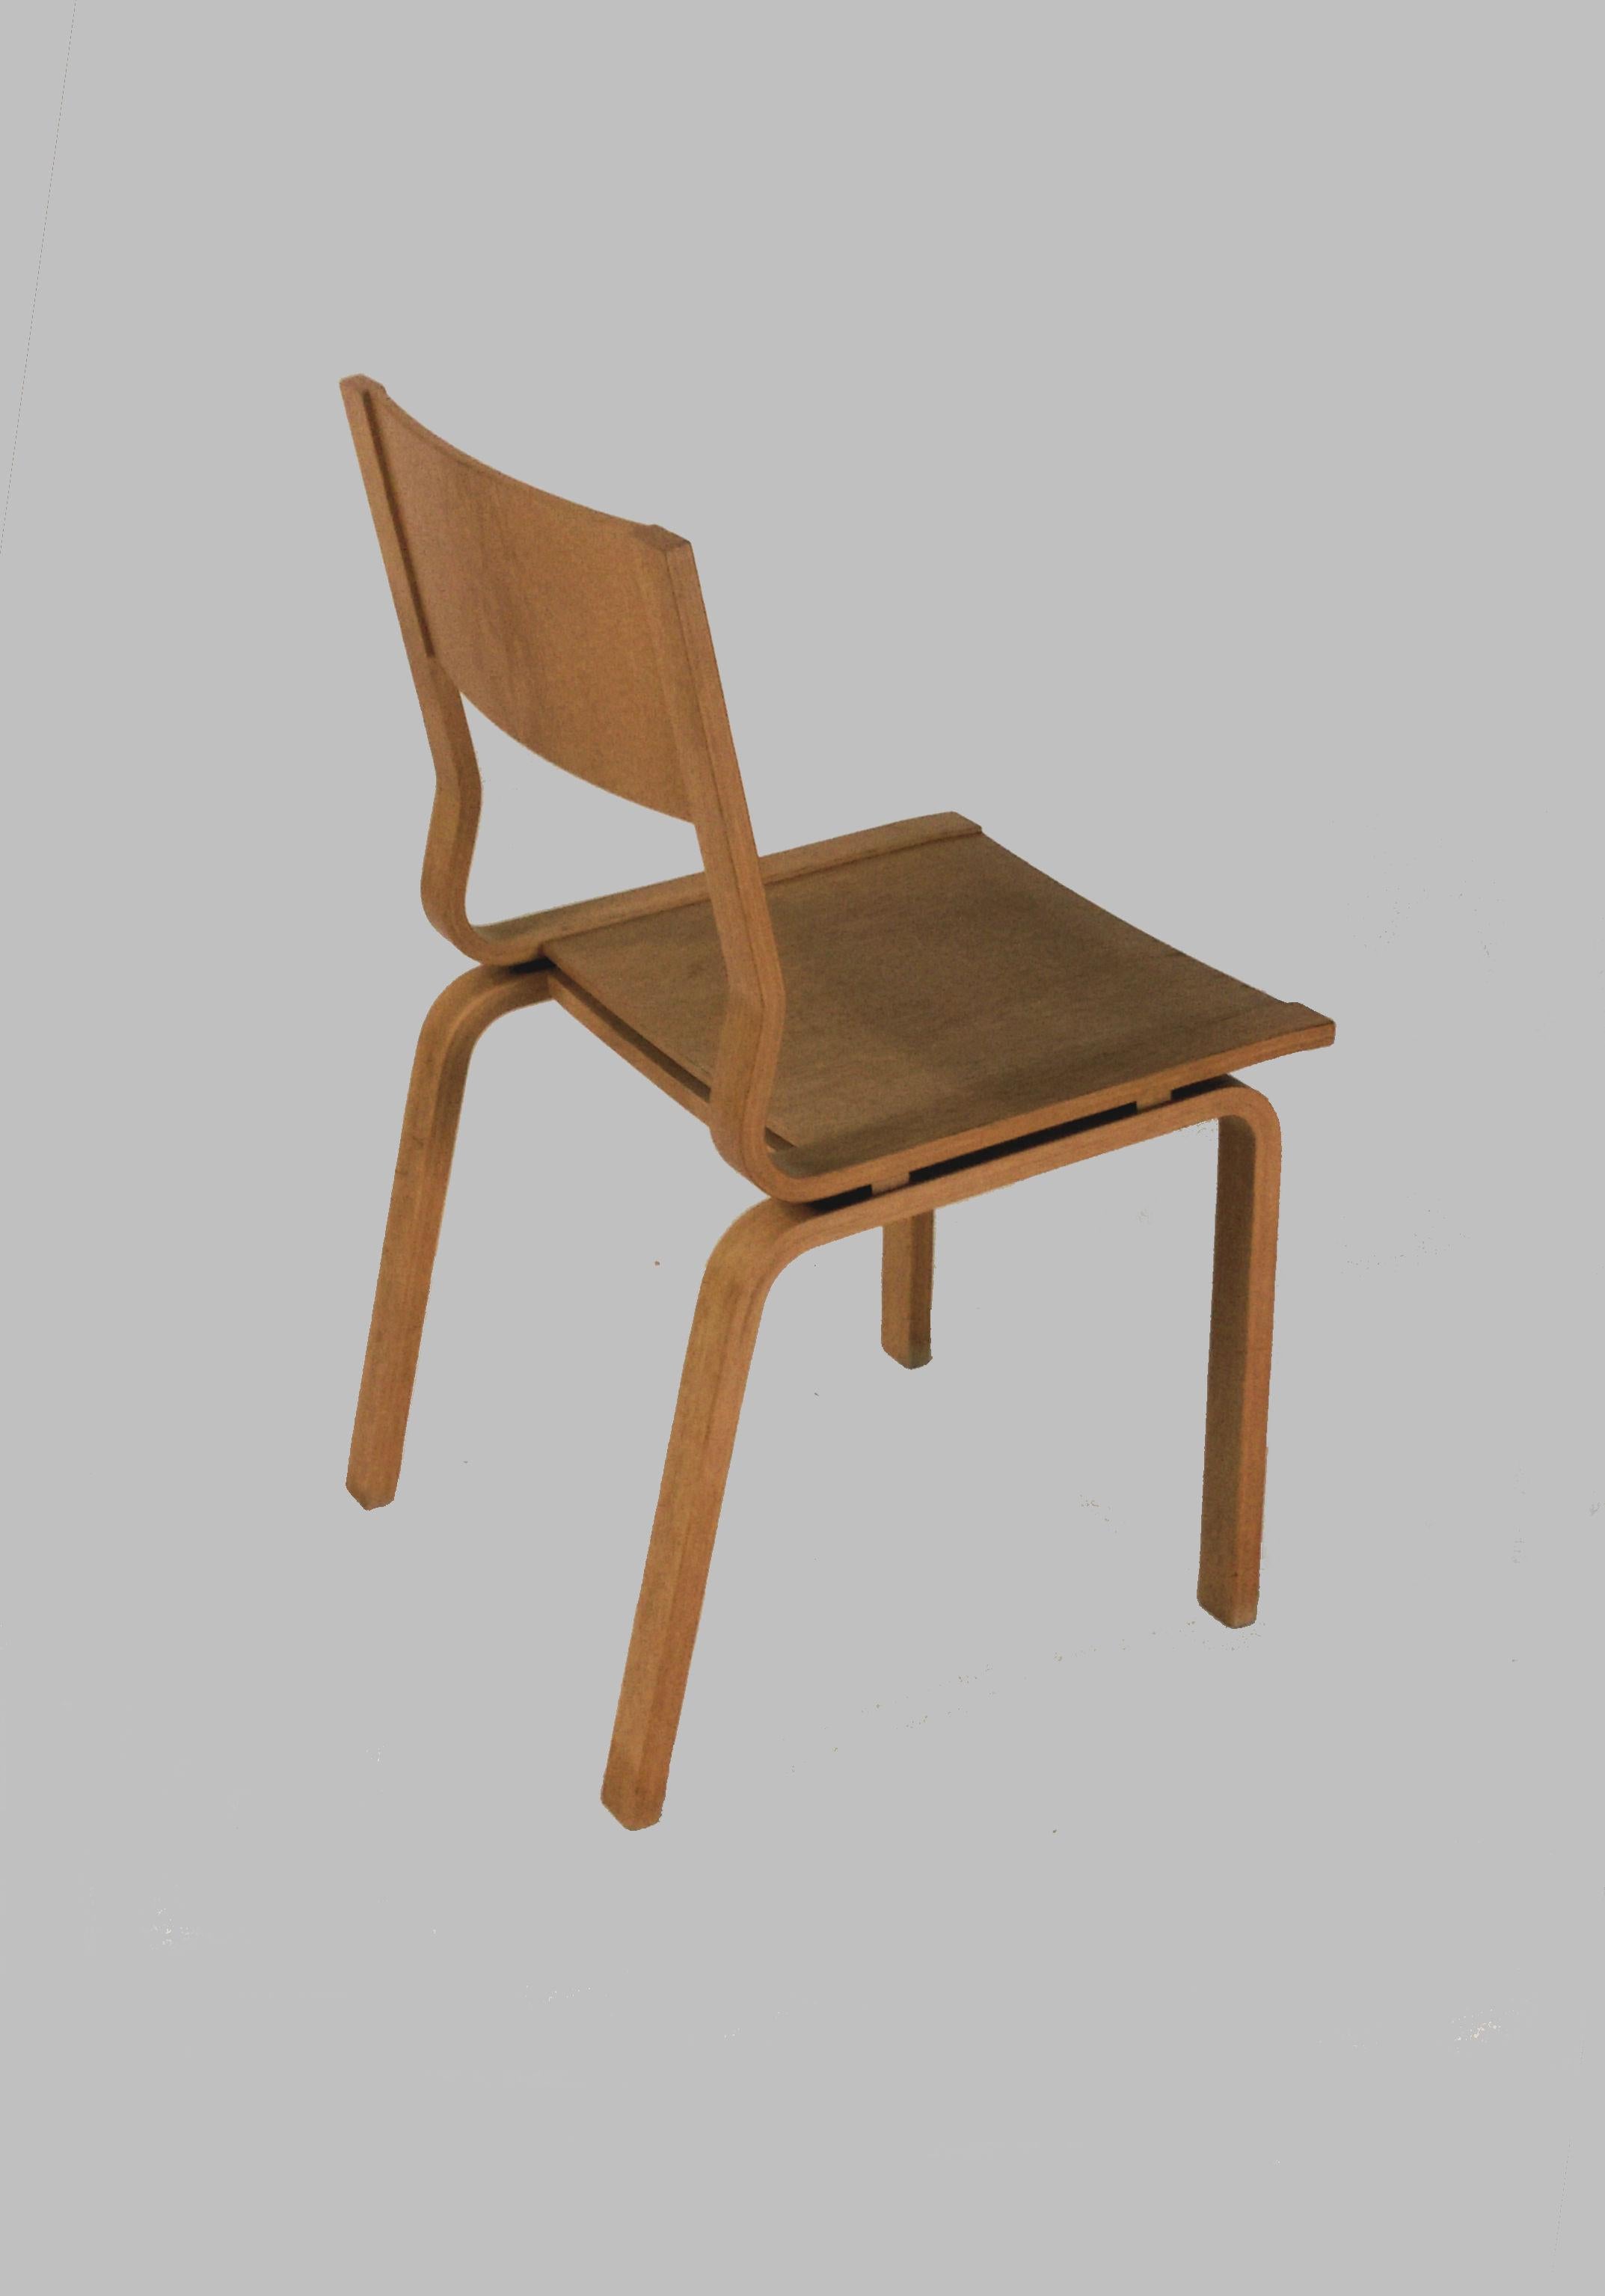 1965 Arne Jacobsen Set of Two Saint Catherines Chairs in Laminated Oak 1